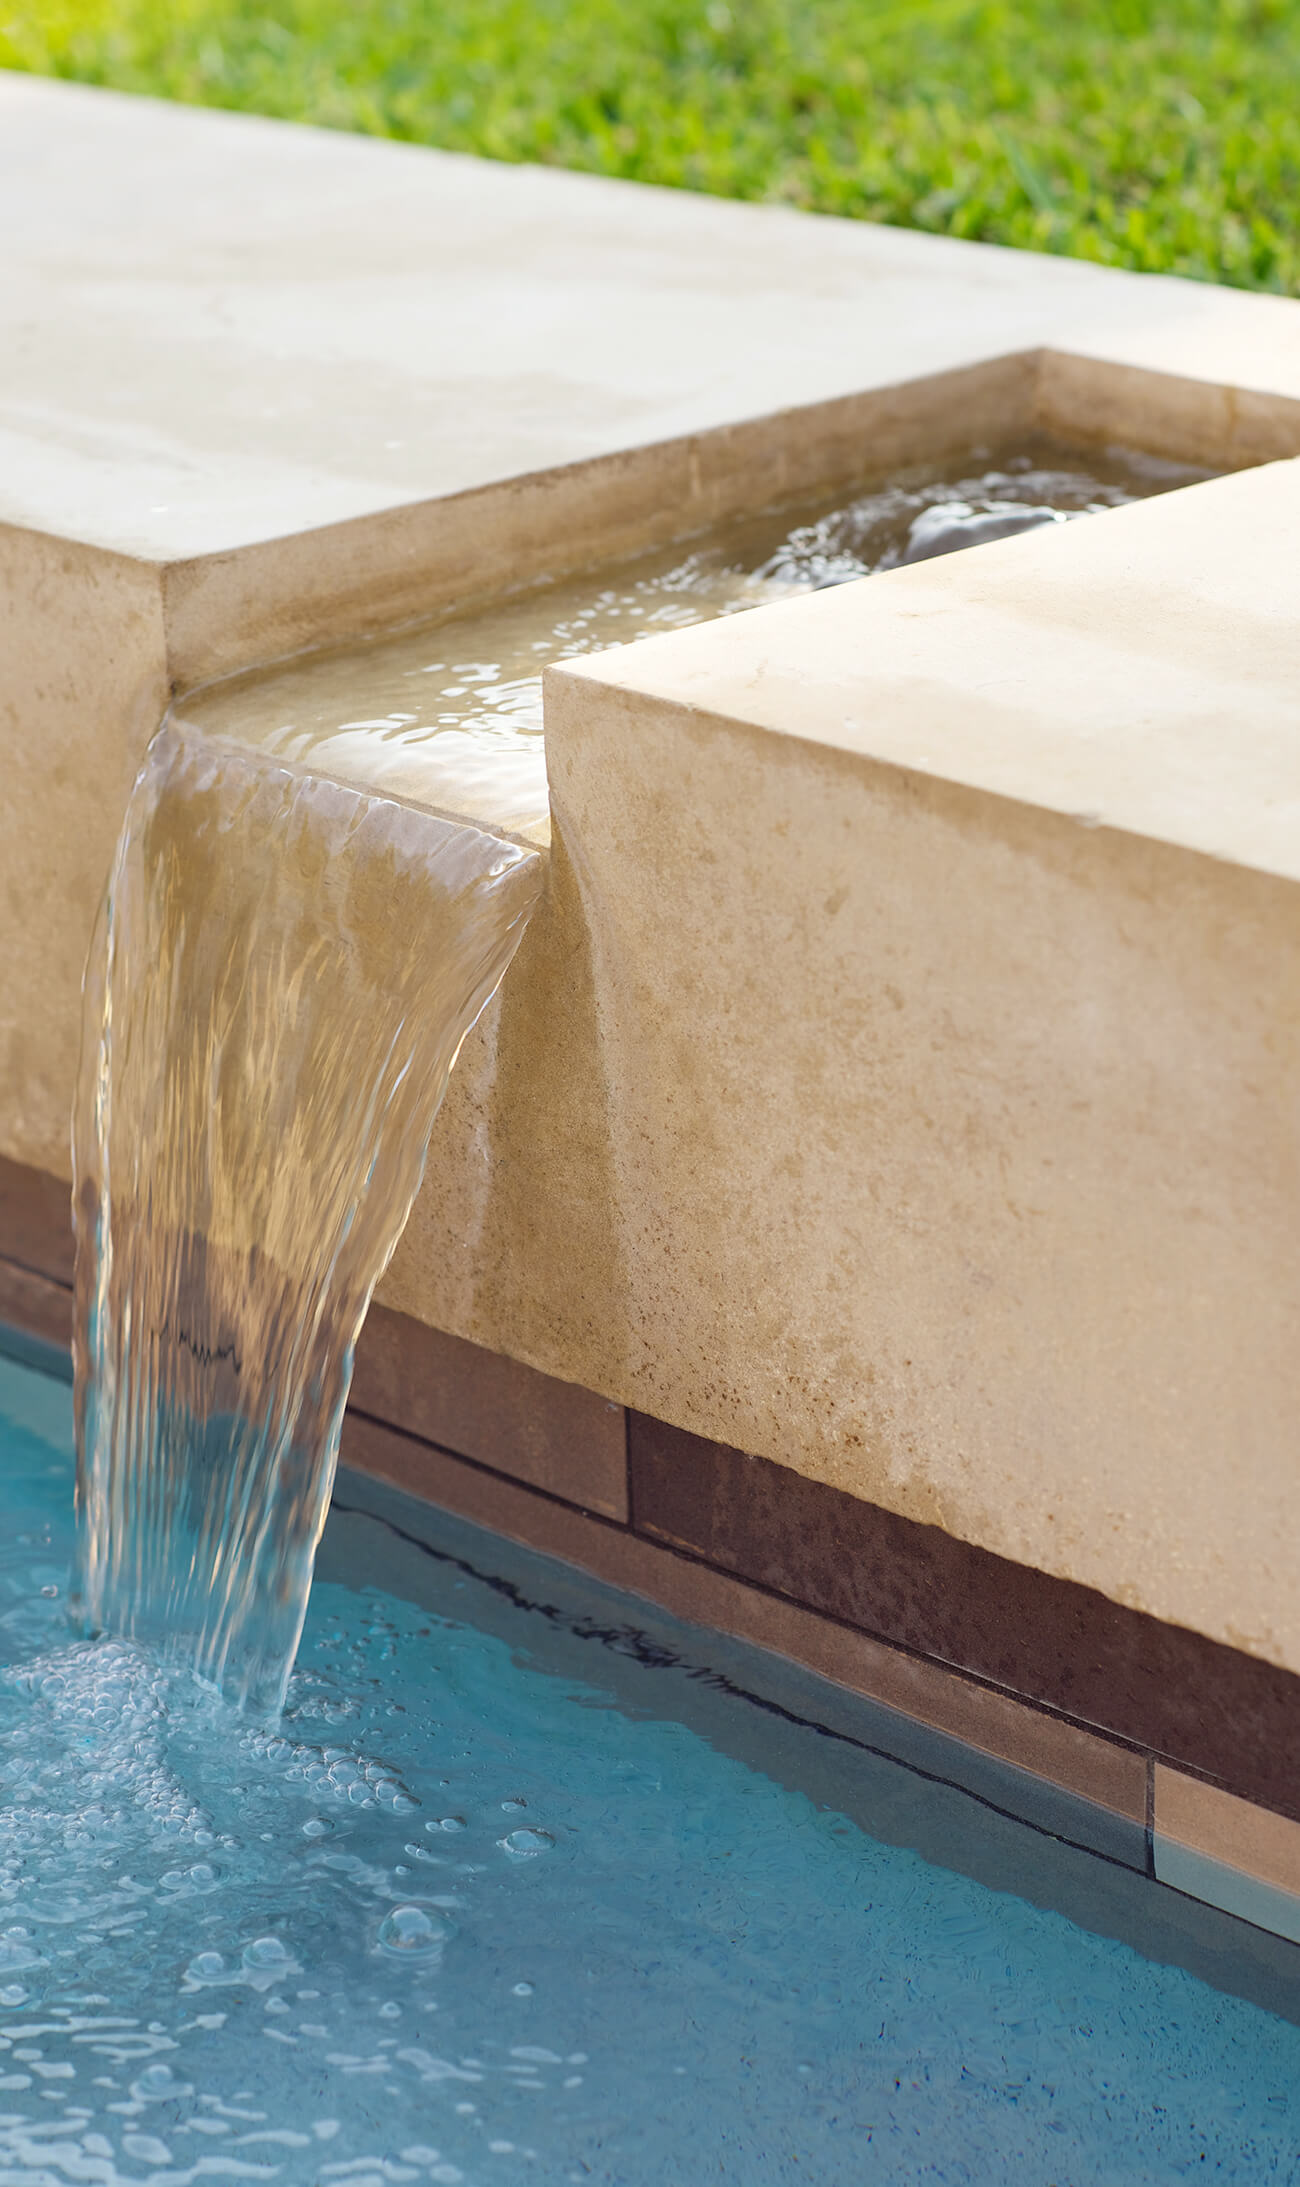 Bonick Landscaping The Wow Factor of Pool Water Features  